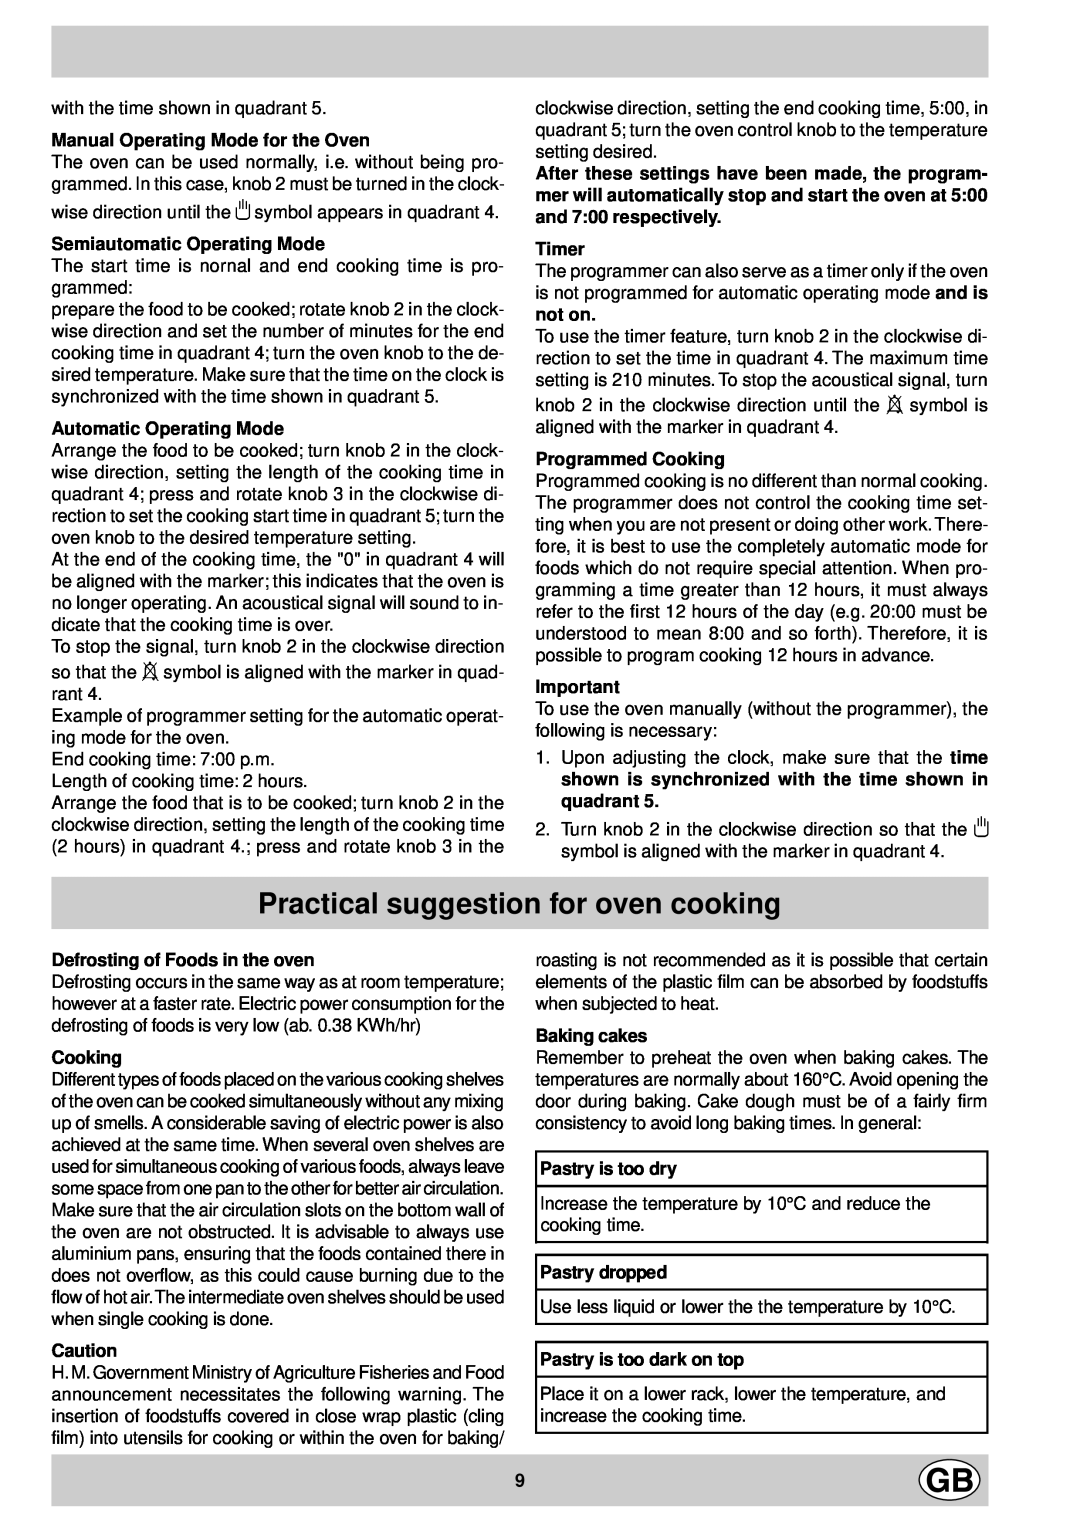 Indesit KG6407 GV/G, KG6407 AV/G, KG6408 XV/G, KG6407 LV/G manual Practical suggestion for oven cooking 